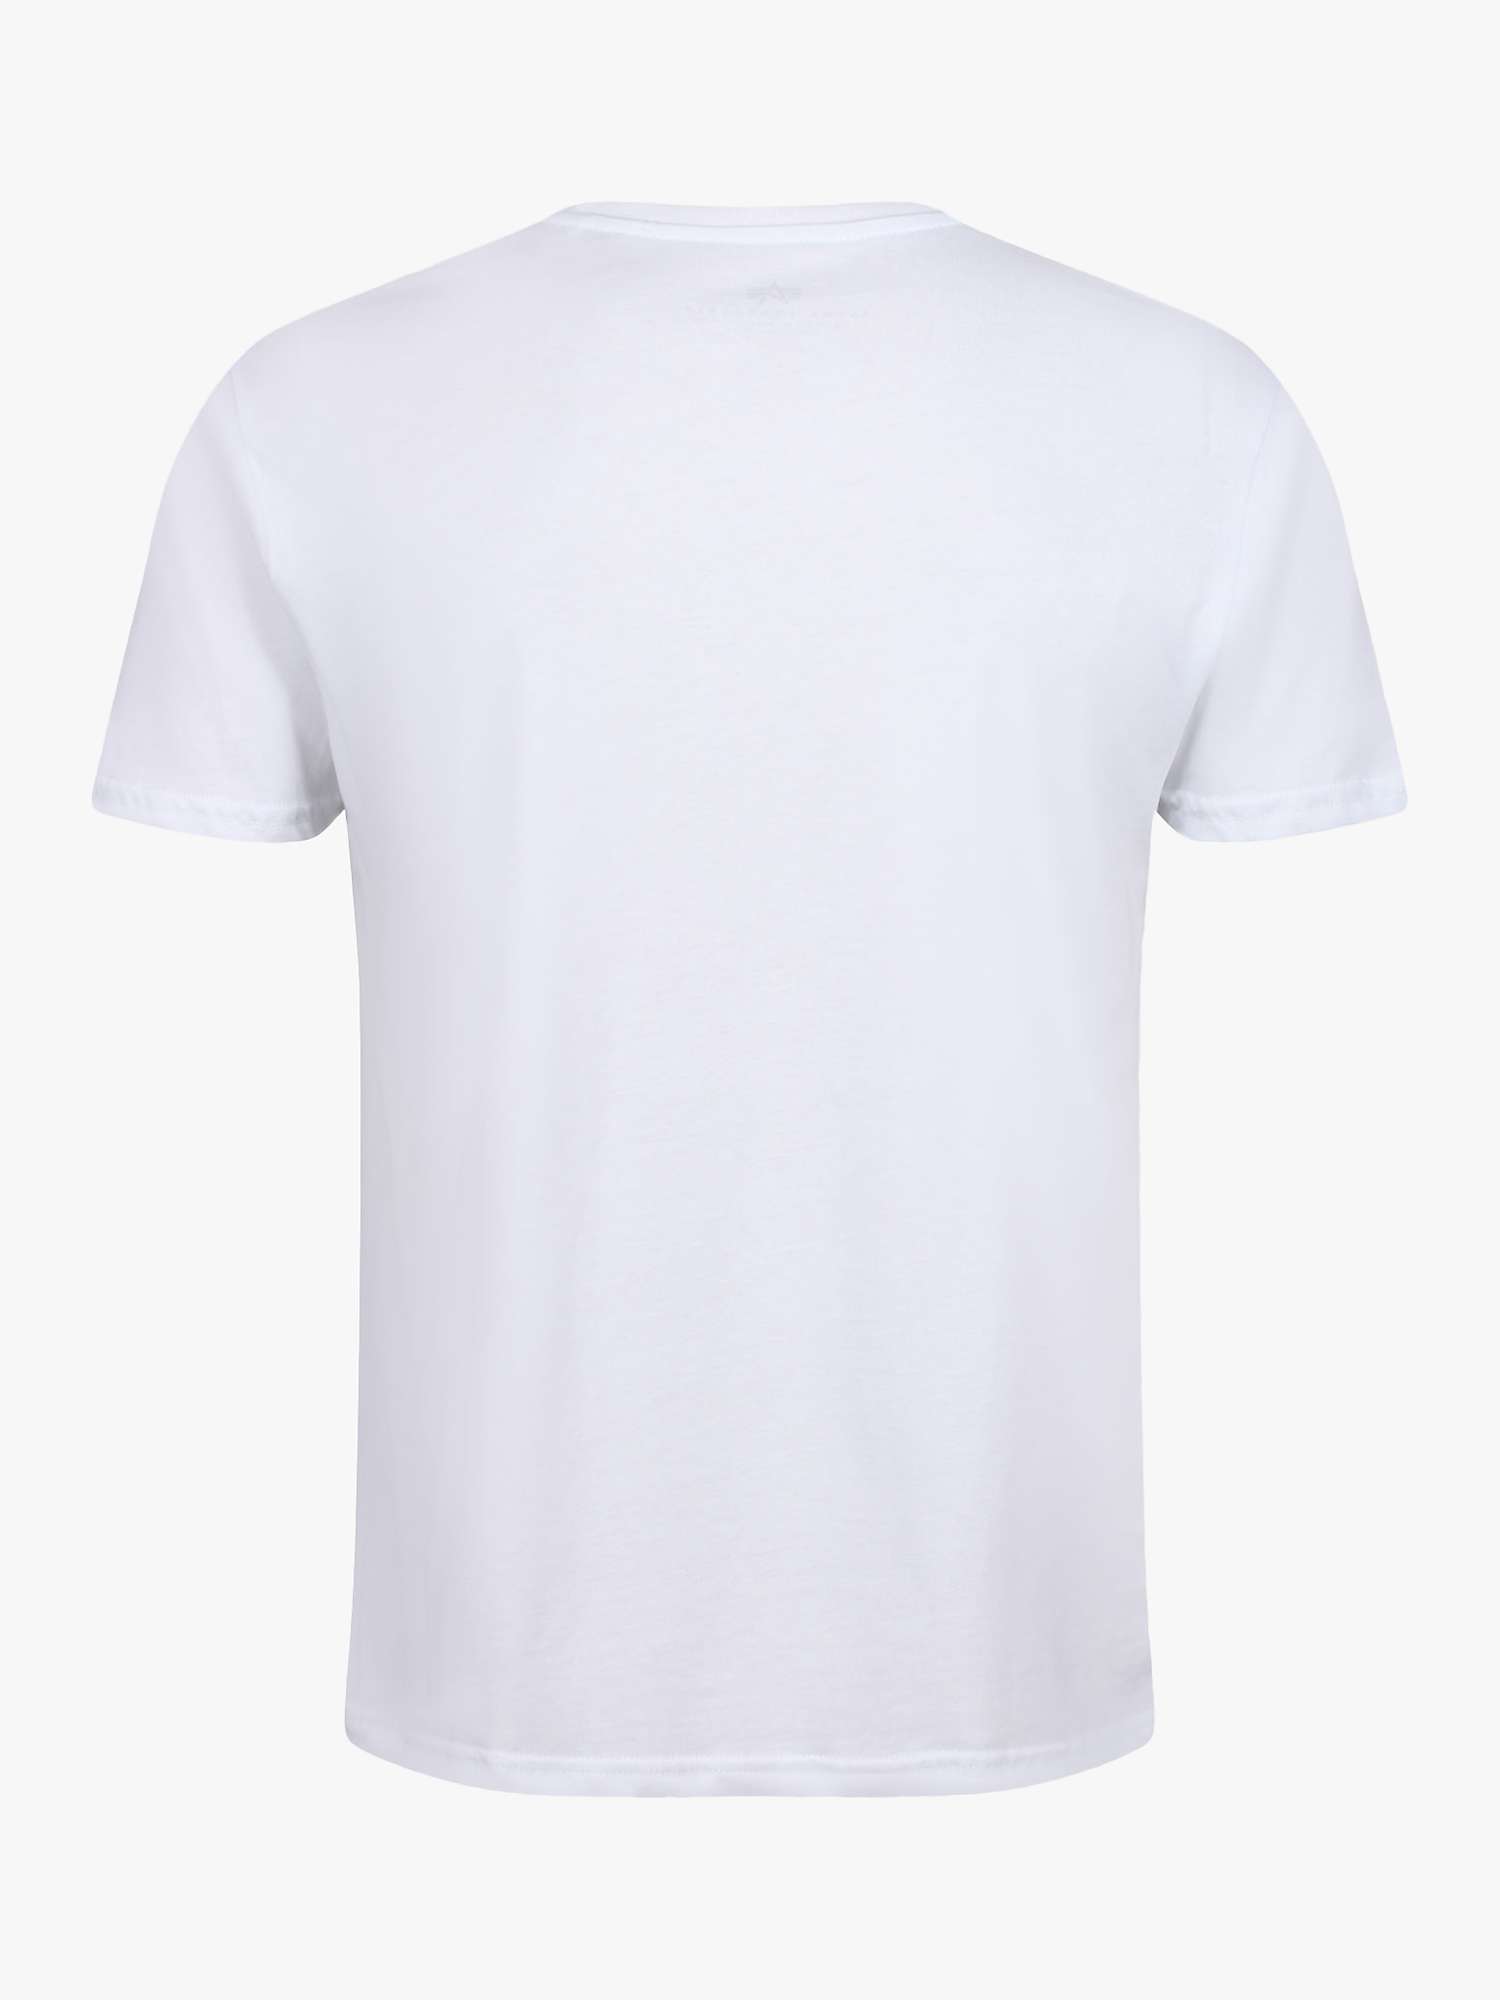 Buy Alpha Industries Crew T-Shirt, Pack of 2 Online at johnlewis.com